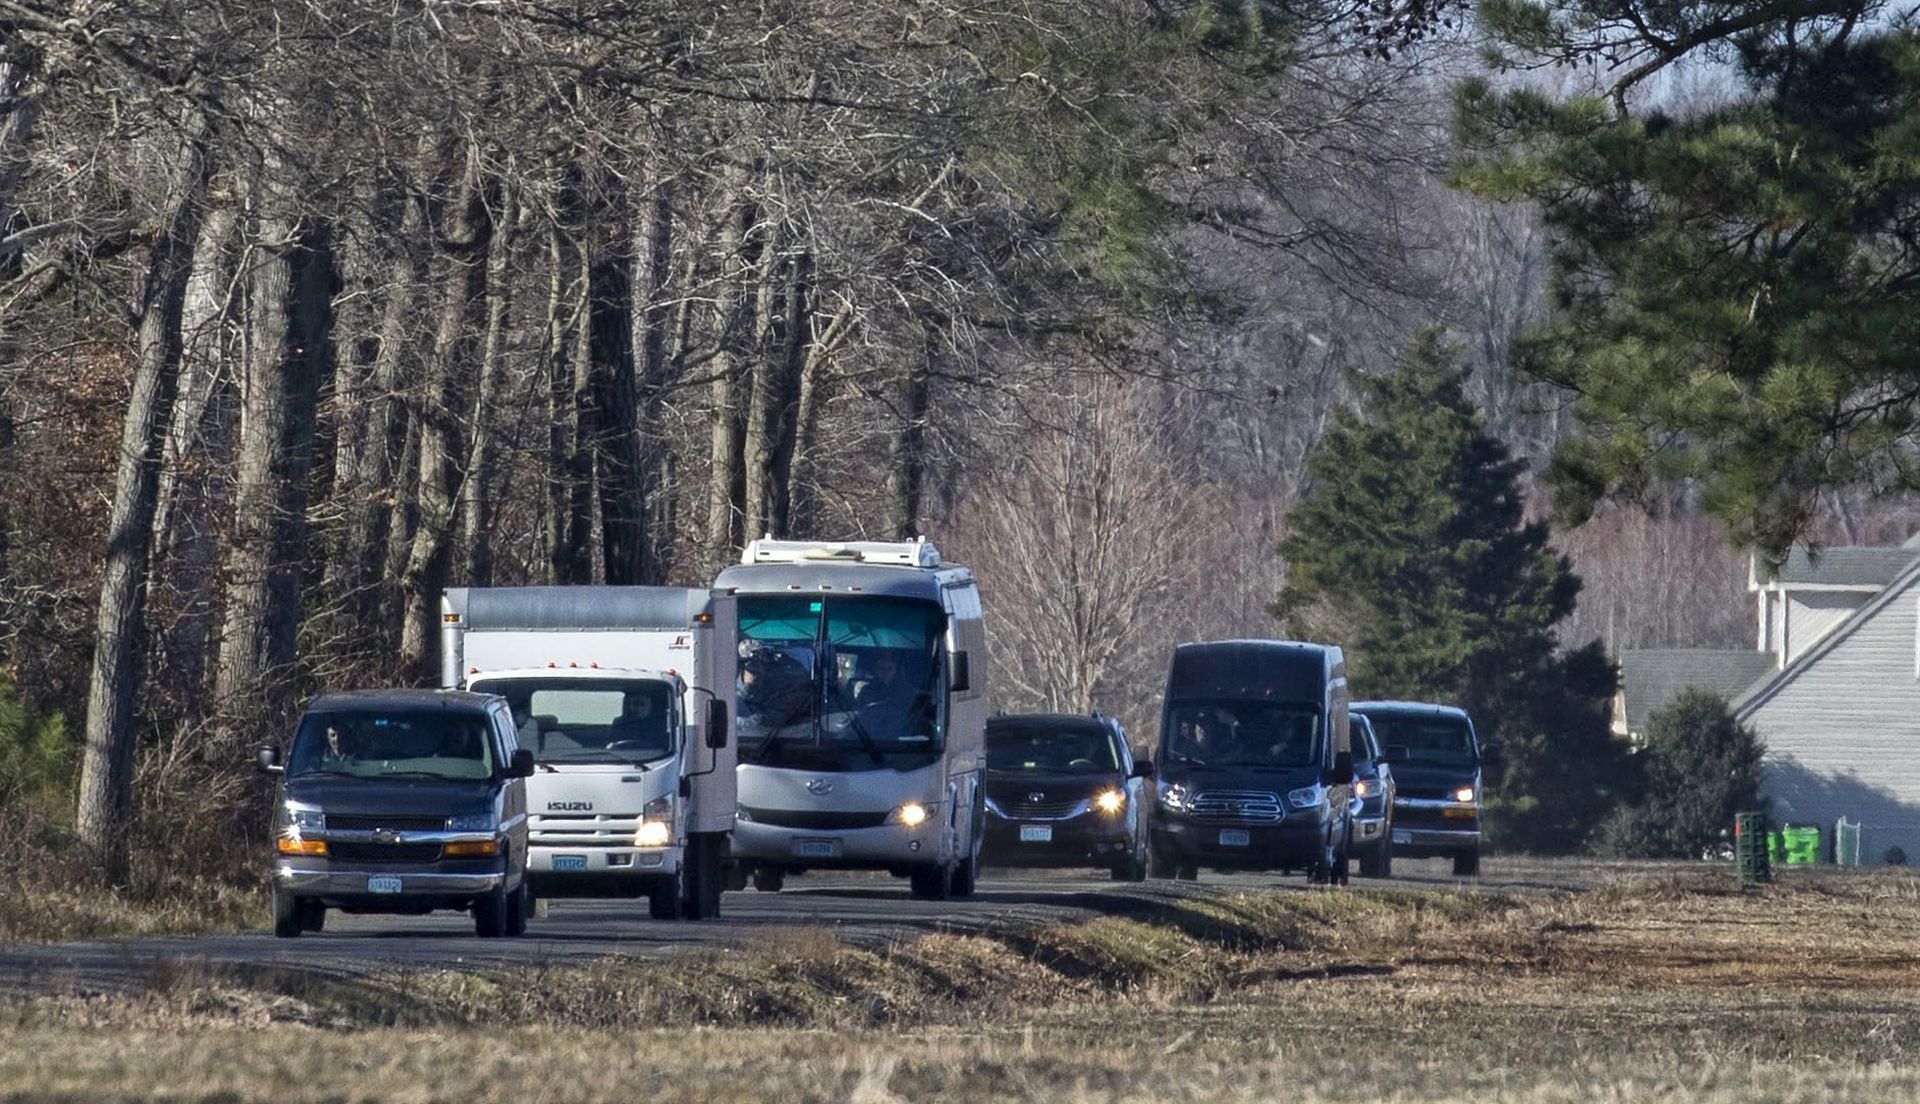 epa05691955 A convoy of vehicles with diplomatic plates driving away from the Russian compound near Centerville, Maryland, USA, 30 December 2016. US President Barack Obama on 29 December 2016 announced the expulsion of 35 Russian diplomats and the closing of two compounds used by the Russian officials in retaliation for alleged computer hacking attacks during the US presidential election.  EPA/SHAWN THEW